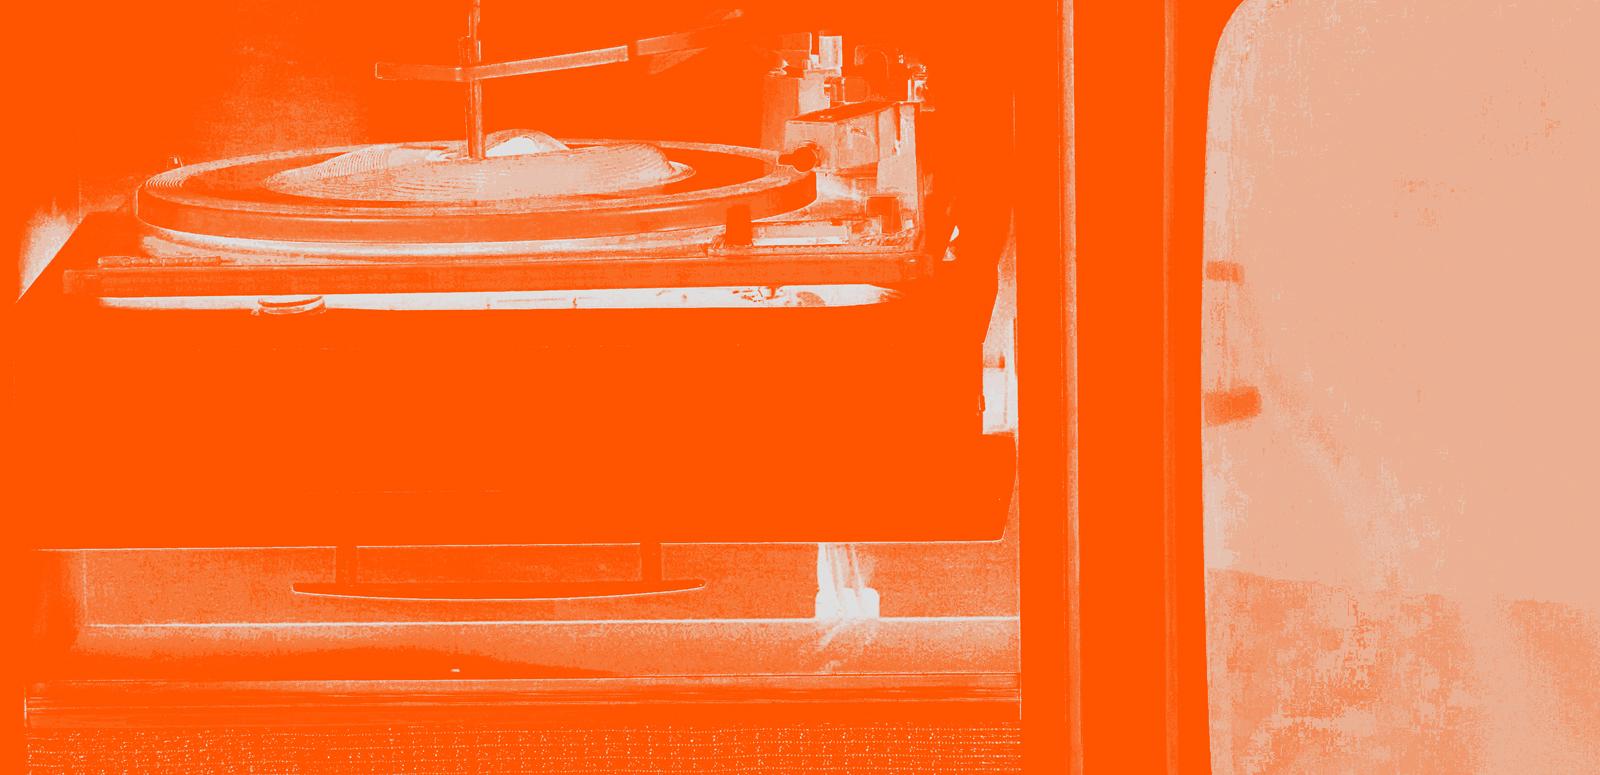 Close crop image of turntable with orange filter